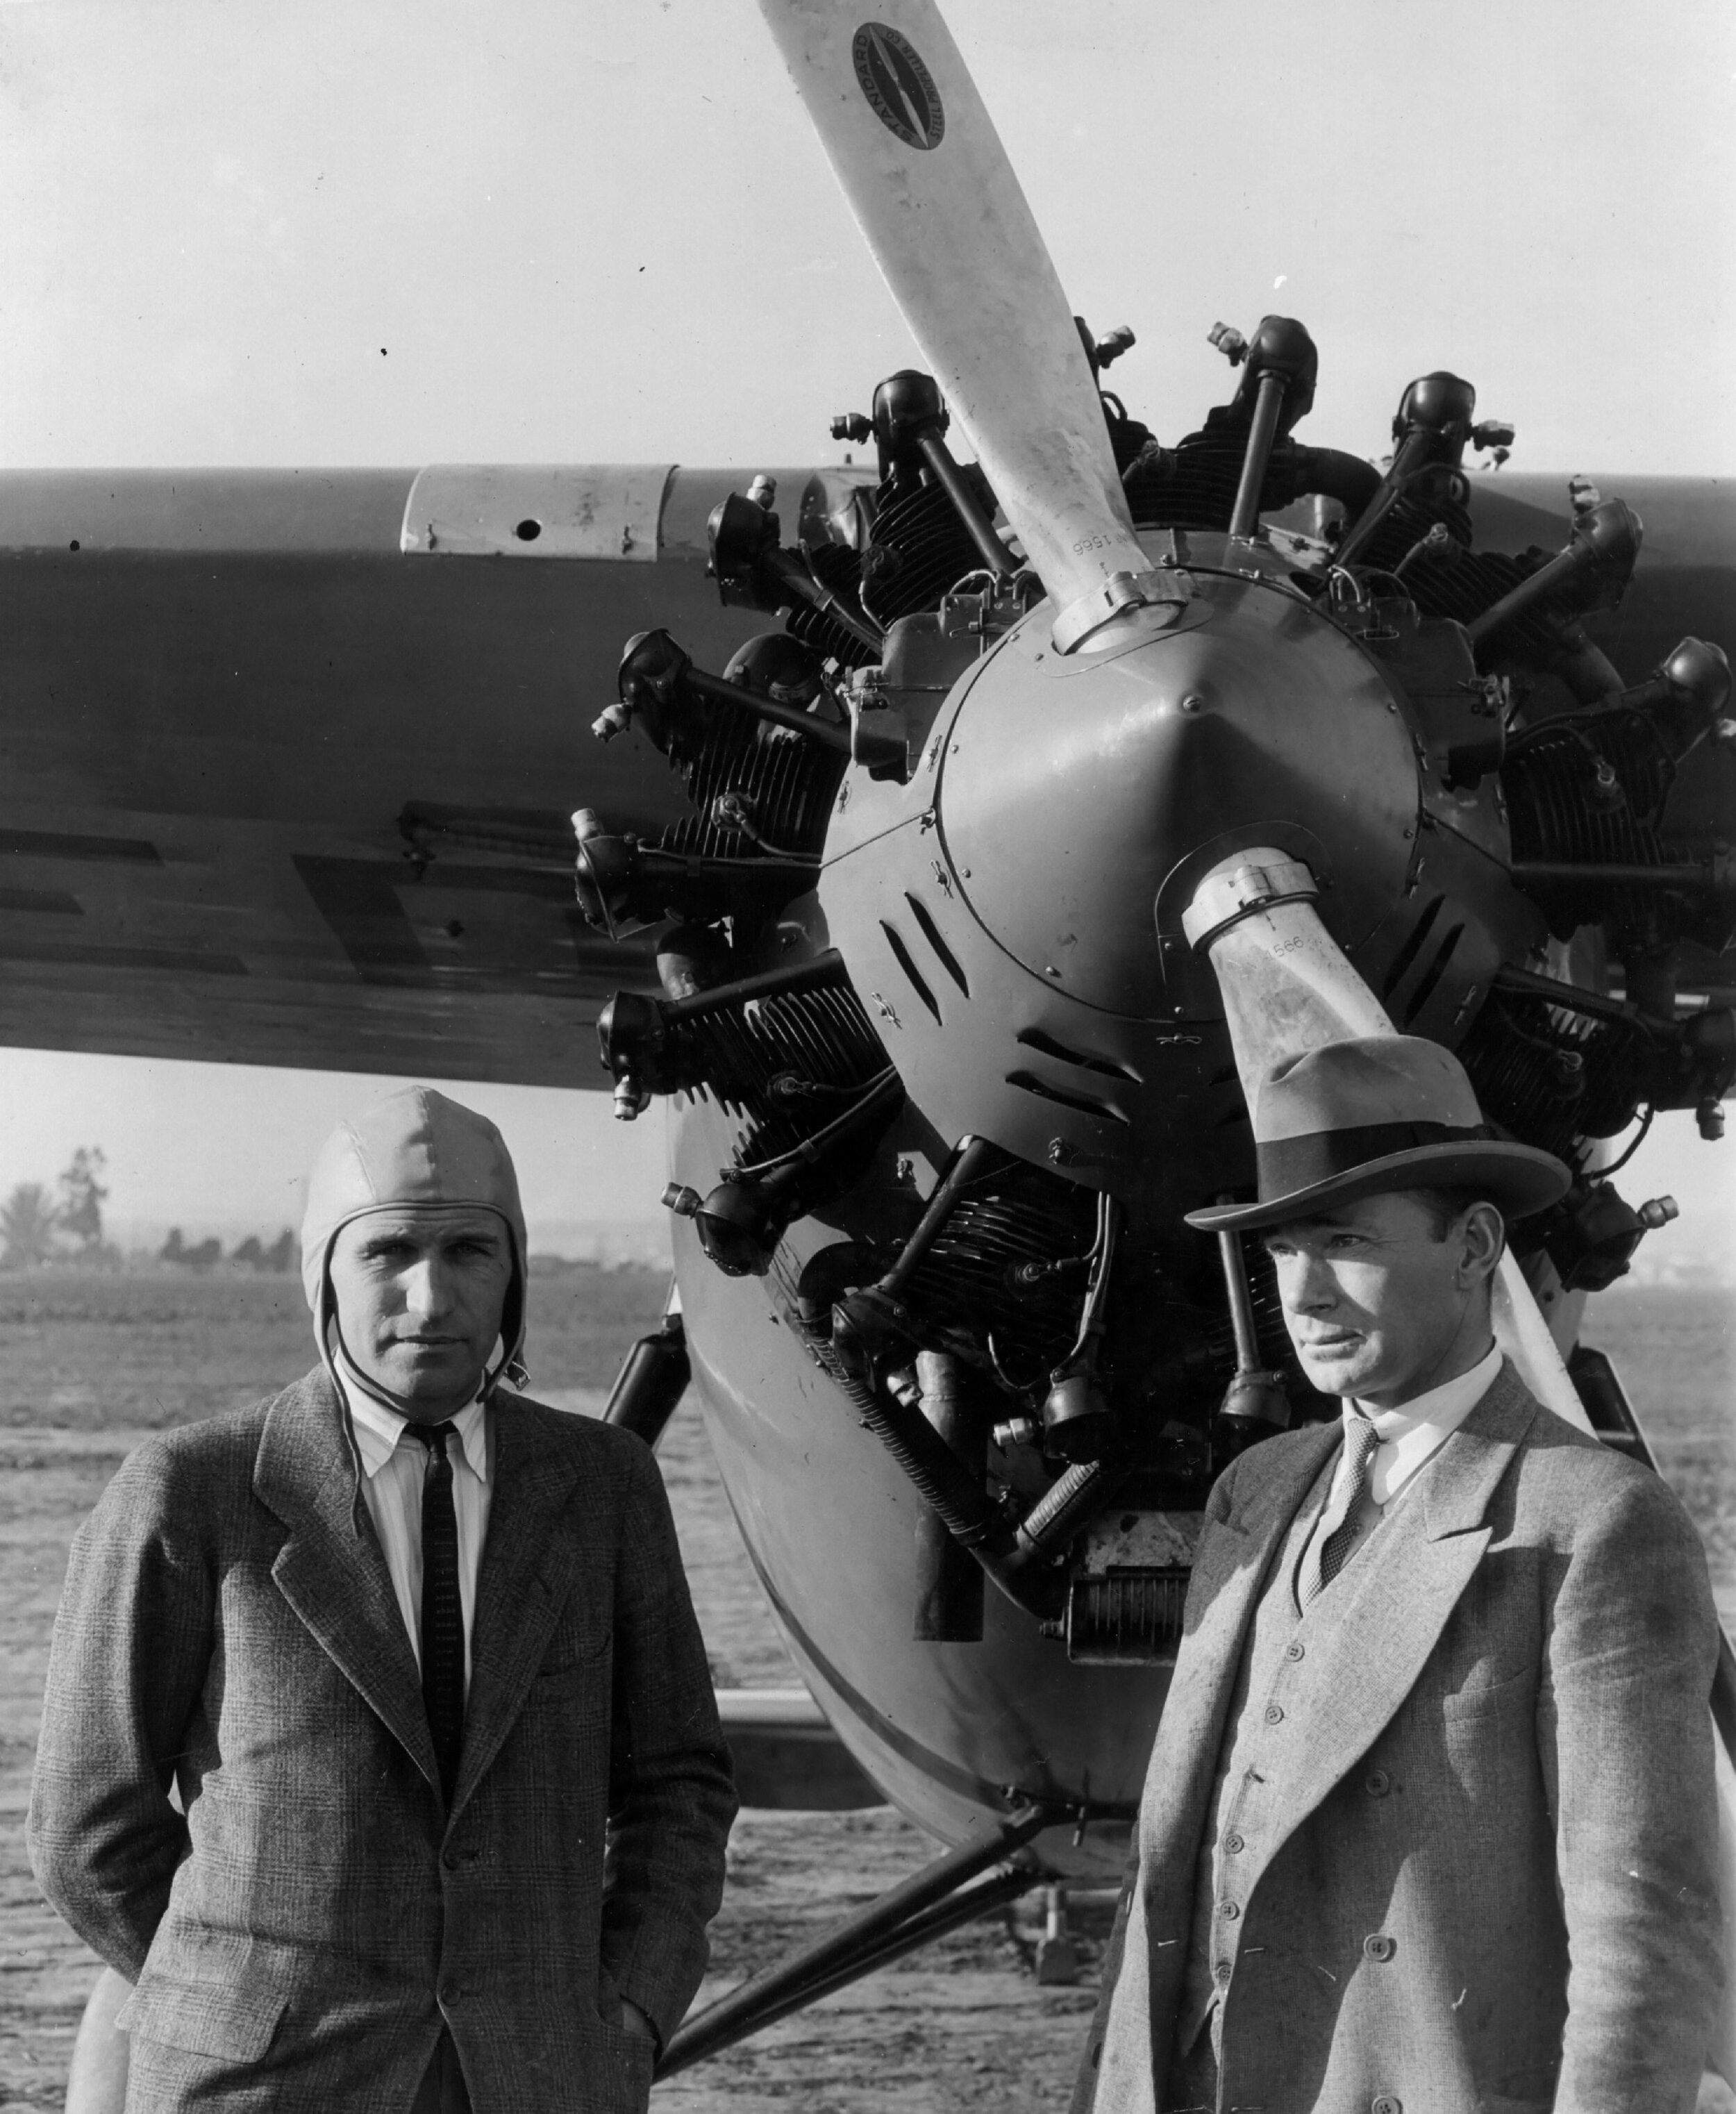 Eielson and Wilkins together in front of one of the original Fokkers first used to get the North Pole expedition going.